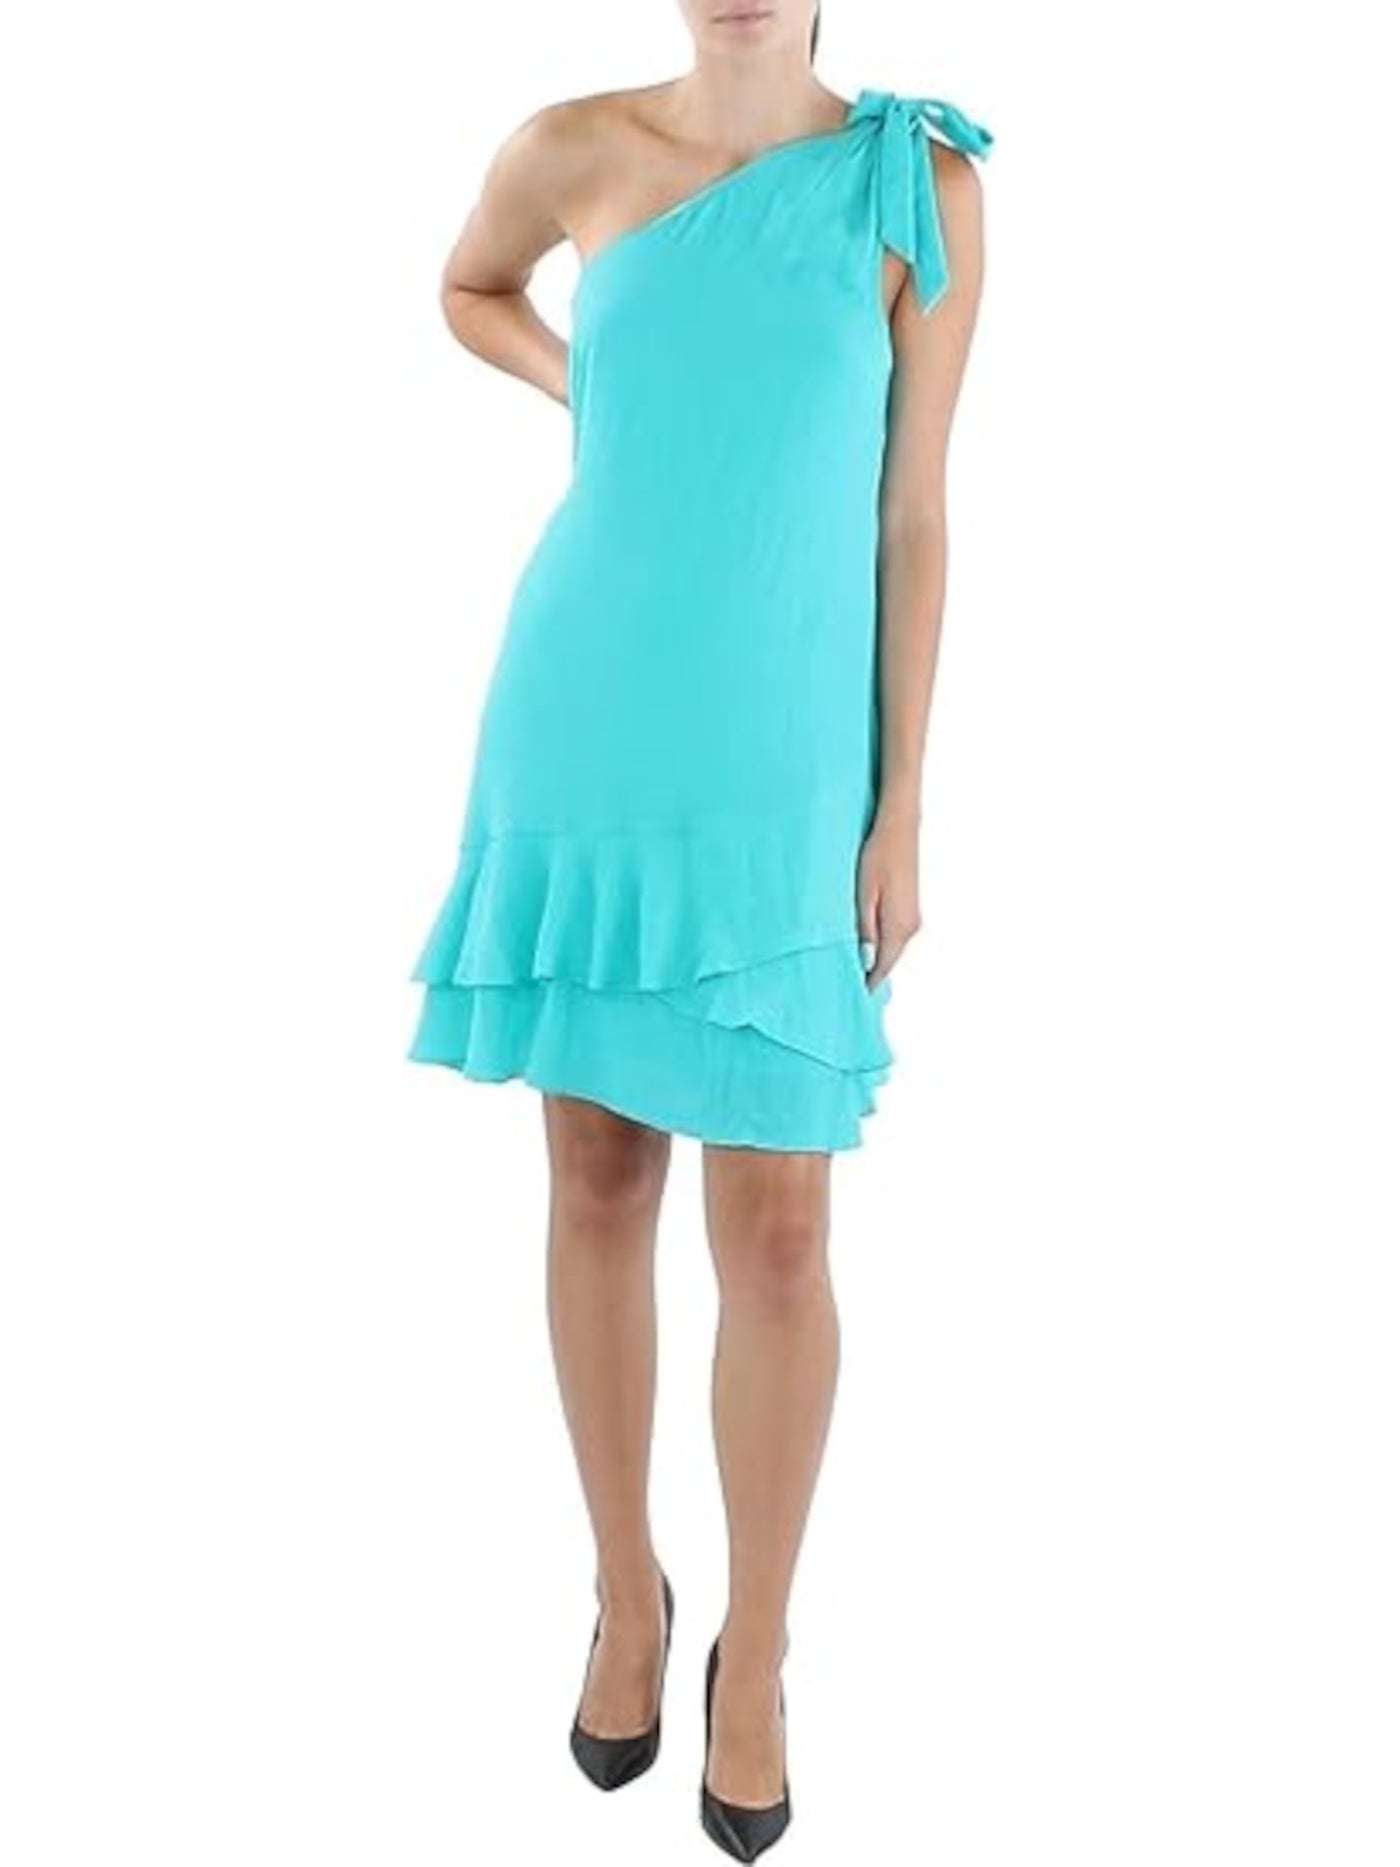 BCBGENERATION Womens Turquoise Textured Zippered Tie Detail Lined Ruffled Lined Sleeveless Asymmetrical Neckline Above The Knee Cocktail Shift Dress 4